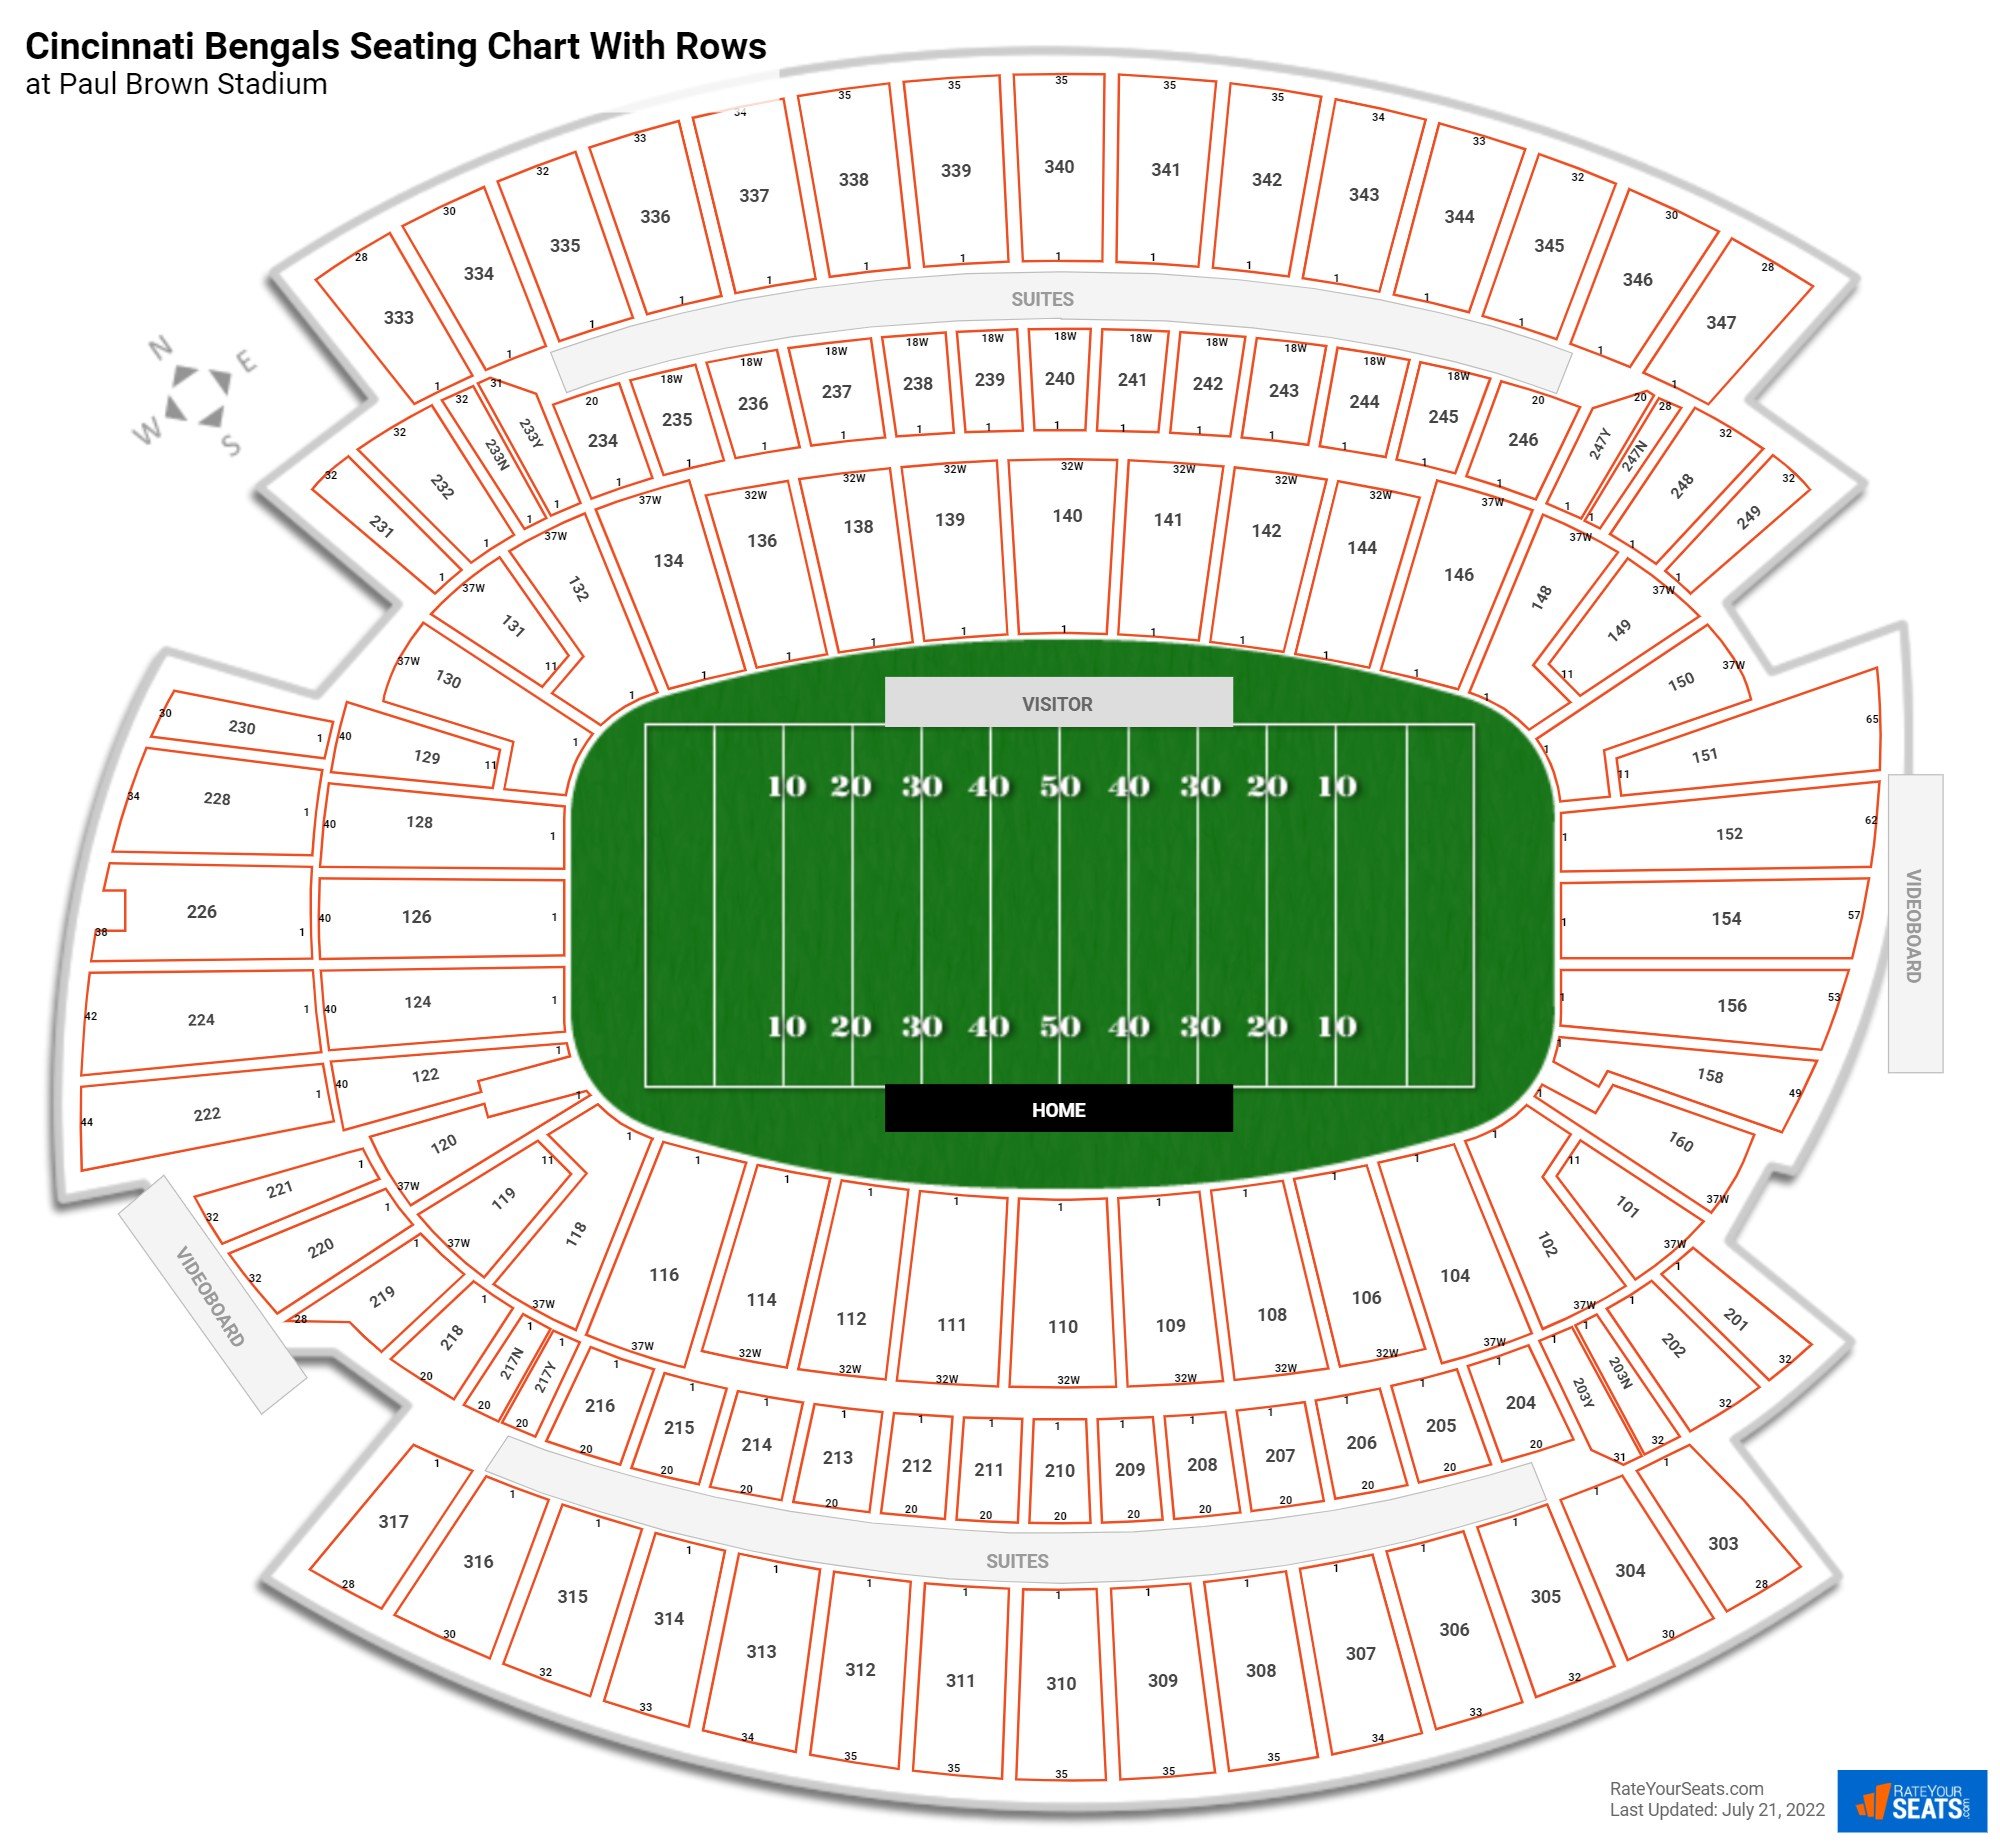 Paul Brown Stadium seating chart with row numbers